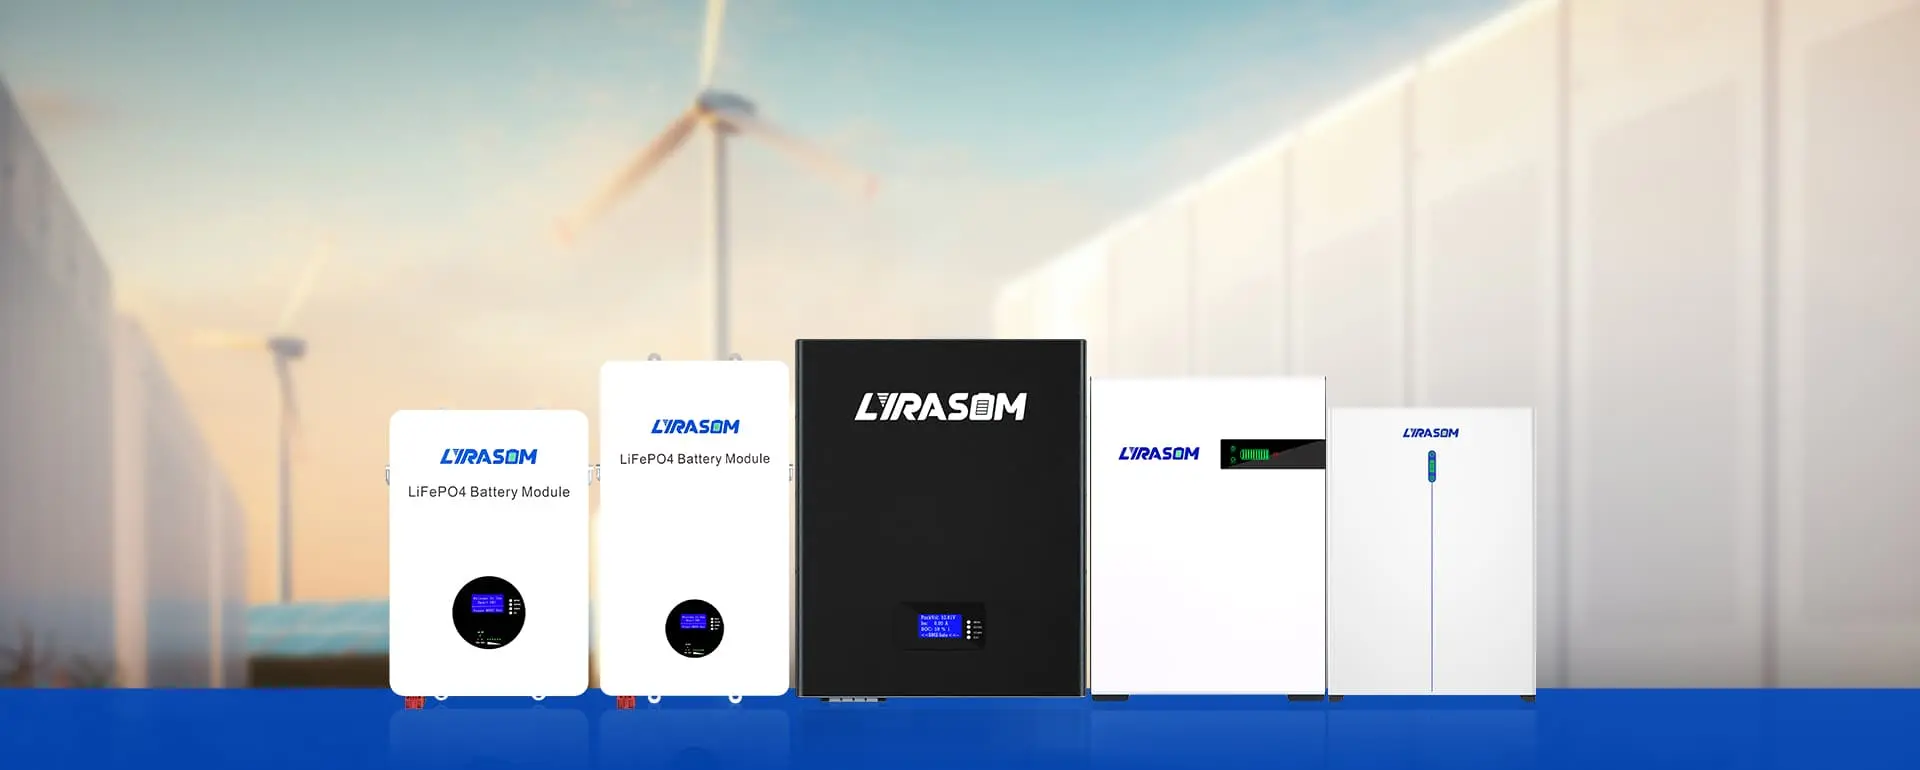 HOME POWER STORAGE WITH WALL-MOUNTED BATTERY ENERGY STORAGE SYSTEM